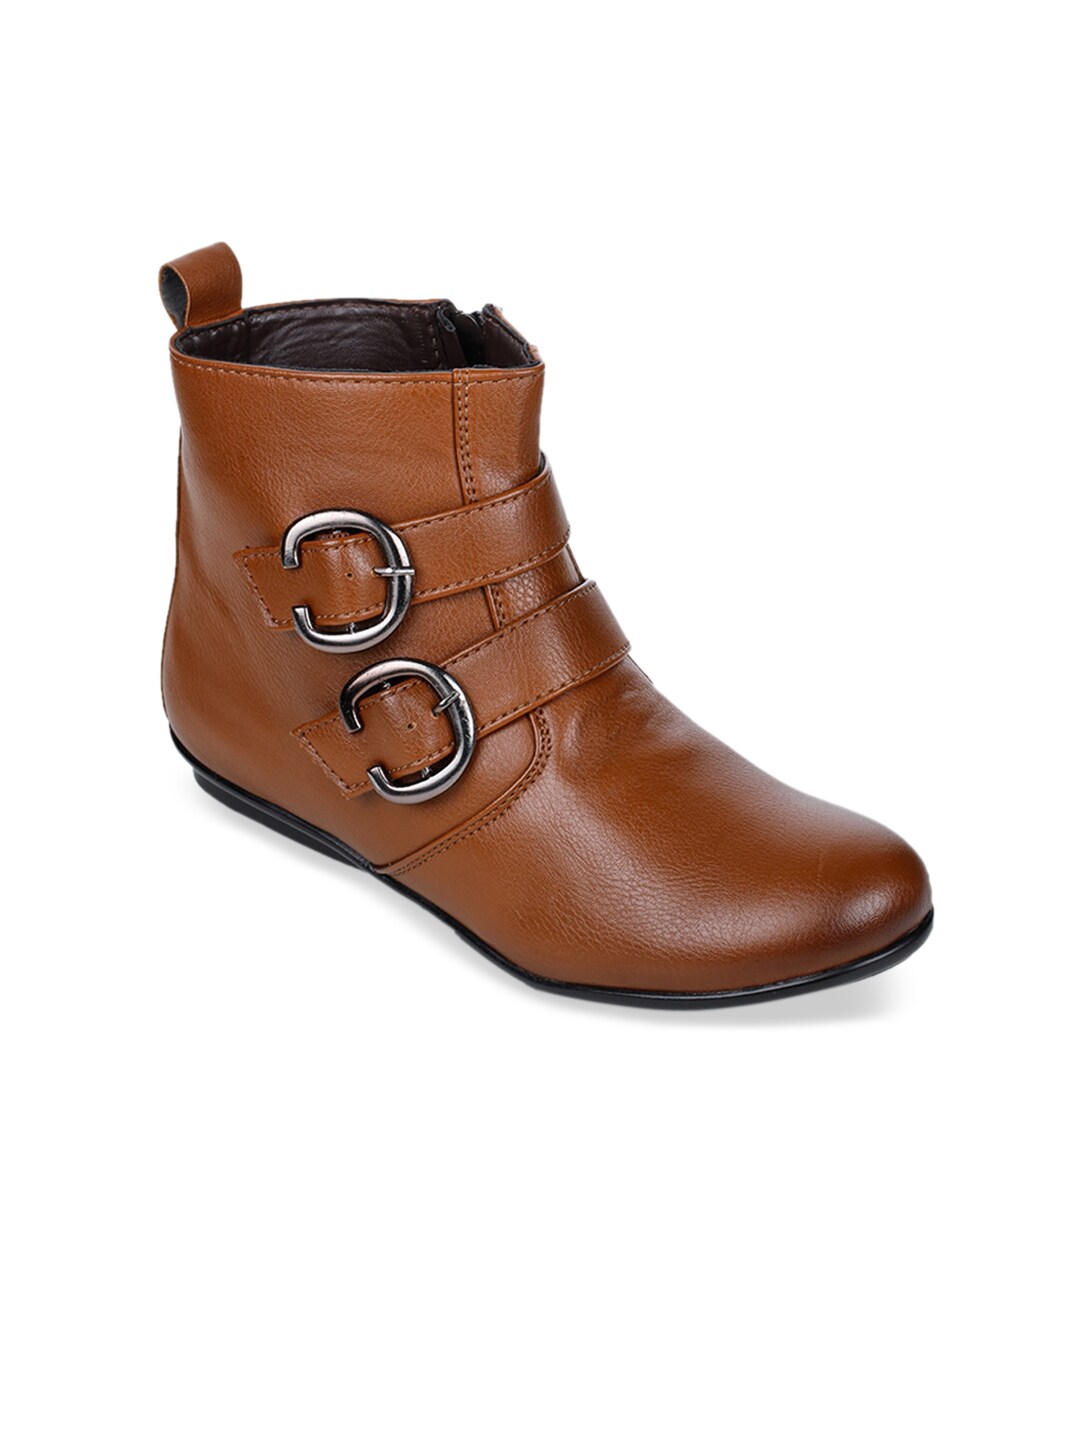 Bruno Manetti Women Tan Brown Solid Flat Boots With Buckle Price in India